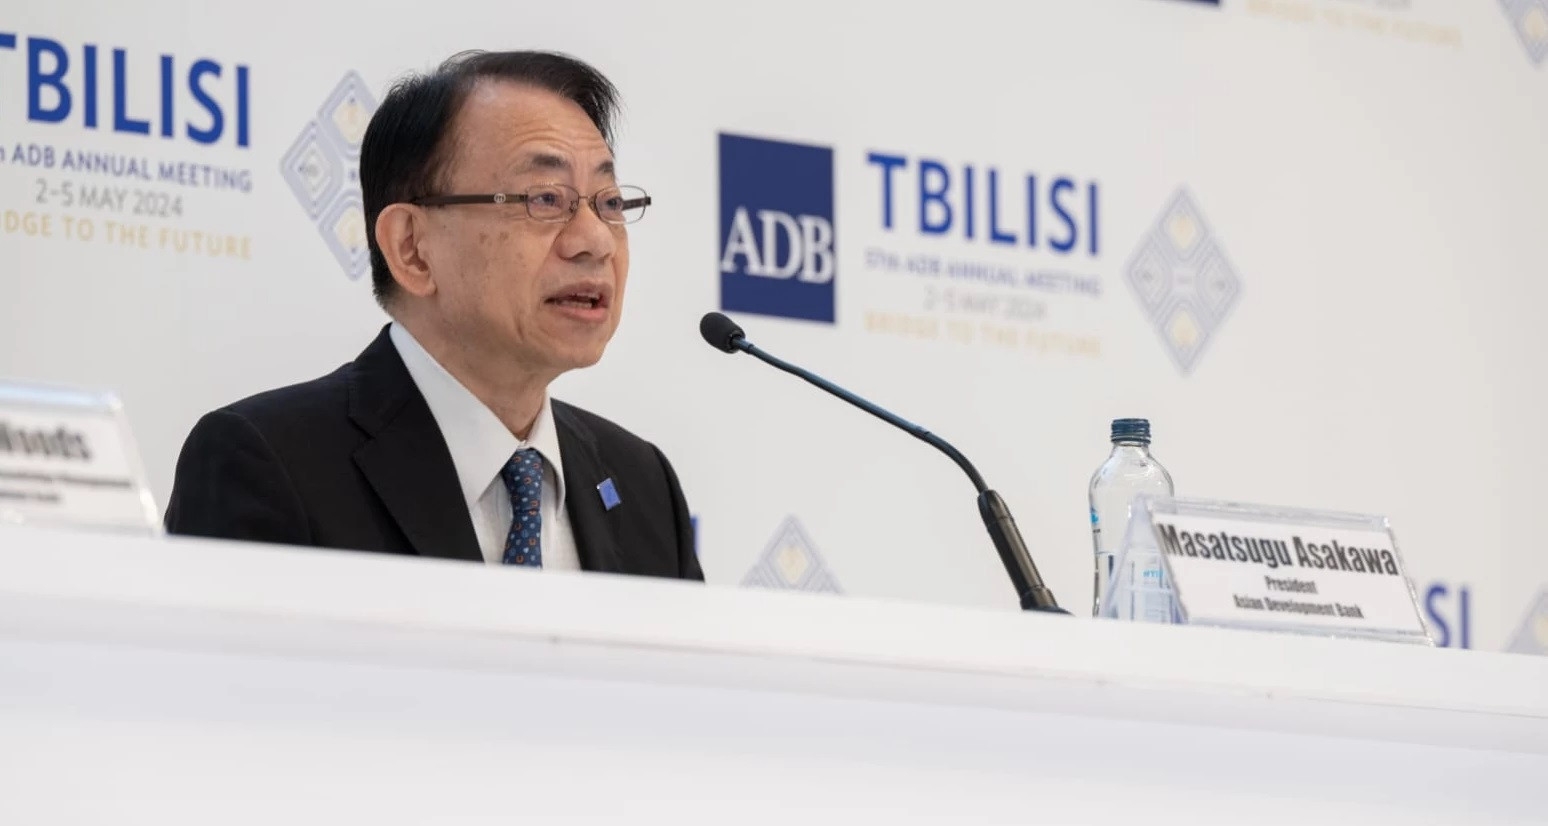 AI offers tremendous potential to drive growth: ADB President